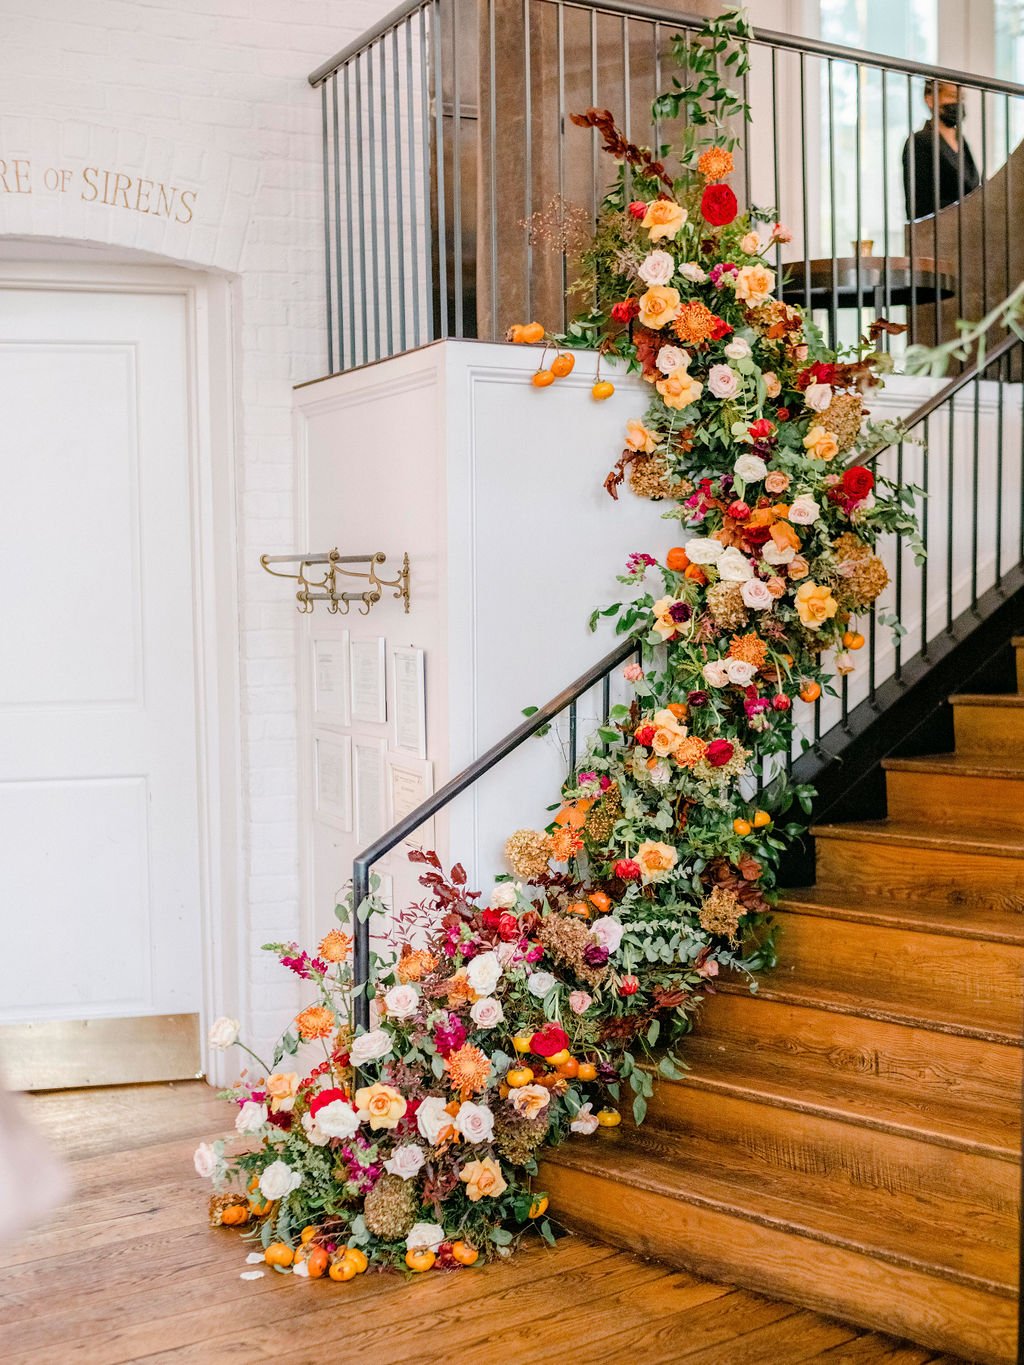 Gorgeous cascading staircase floral installation of fall foliage, lush greenery, and florals inviting guests into the reception space. Located in The St. Cecilia restaurant in Atlanta, GA. Floral Design by Rosemary and Finch in Nashville, TN.